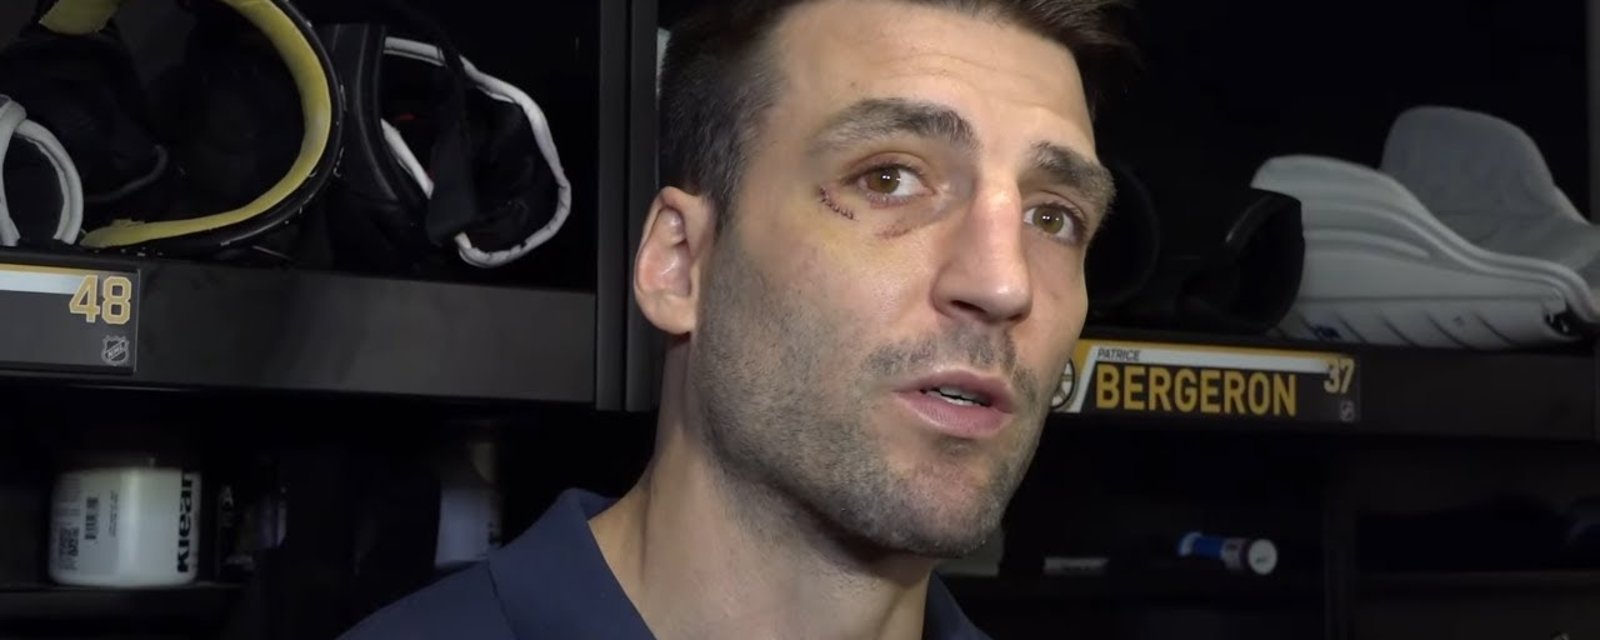 Significant hint emerges on Patrice Bergeron’s decision towards playing future...